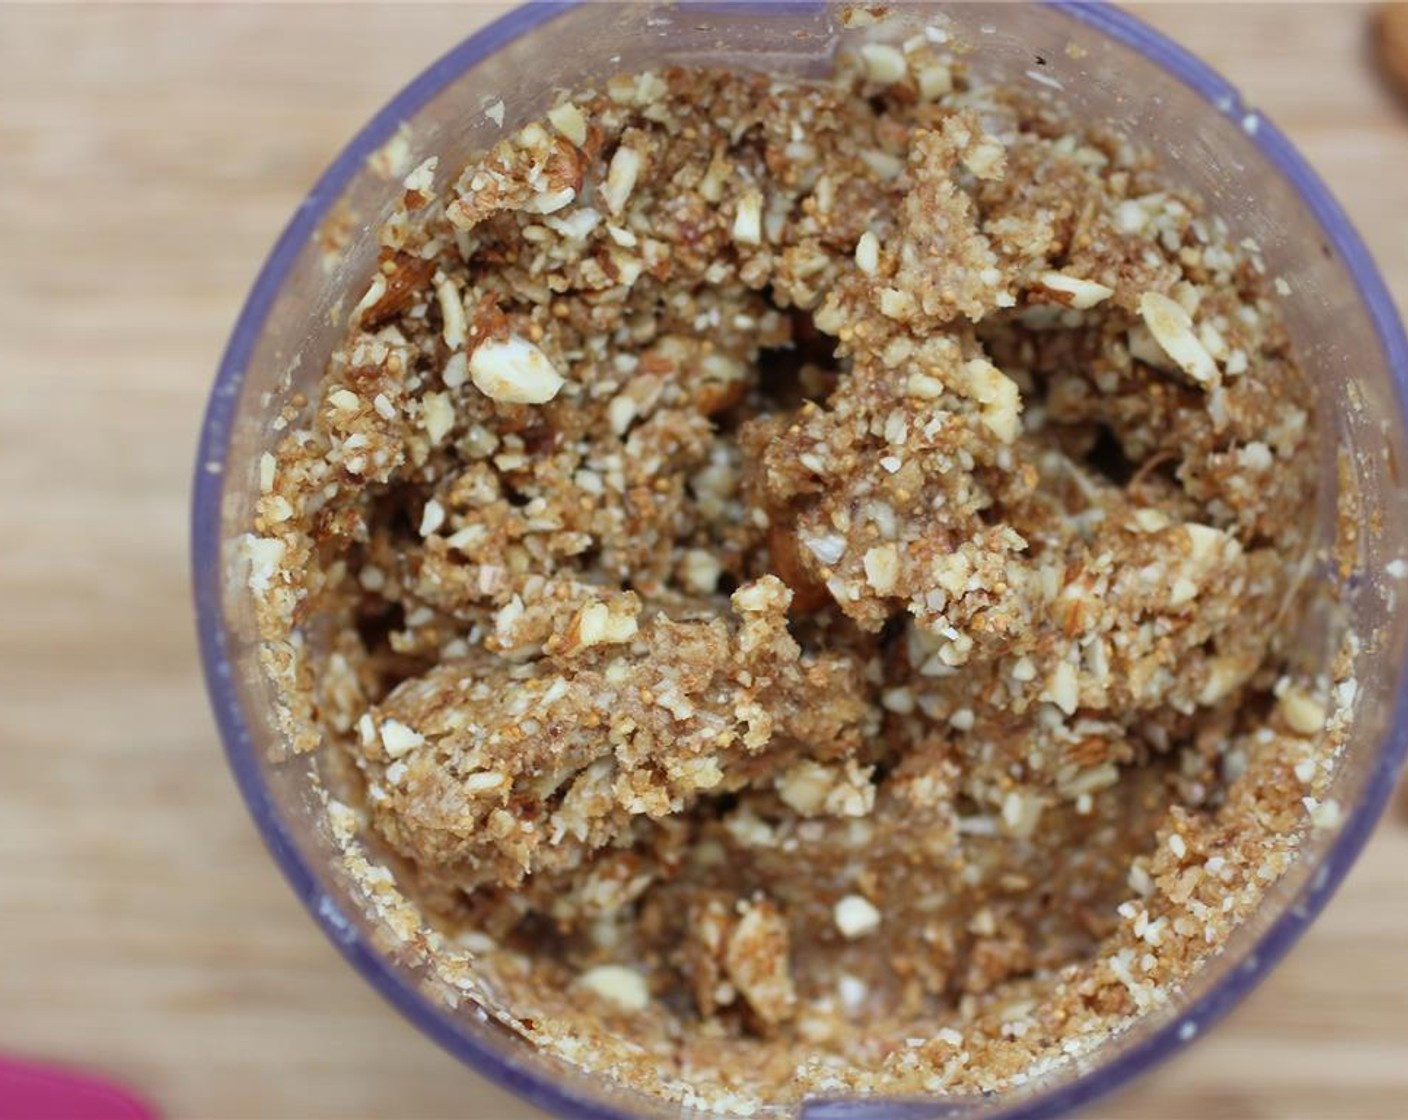 step 2 To make the crust, add Raw Almonds (1 cup), Dried Fig (3/4 cup), Water (1/2 Tbsp), and dates to a food processor and mix to combine.